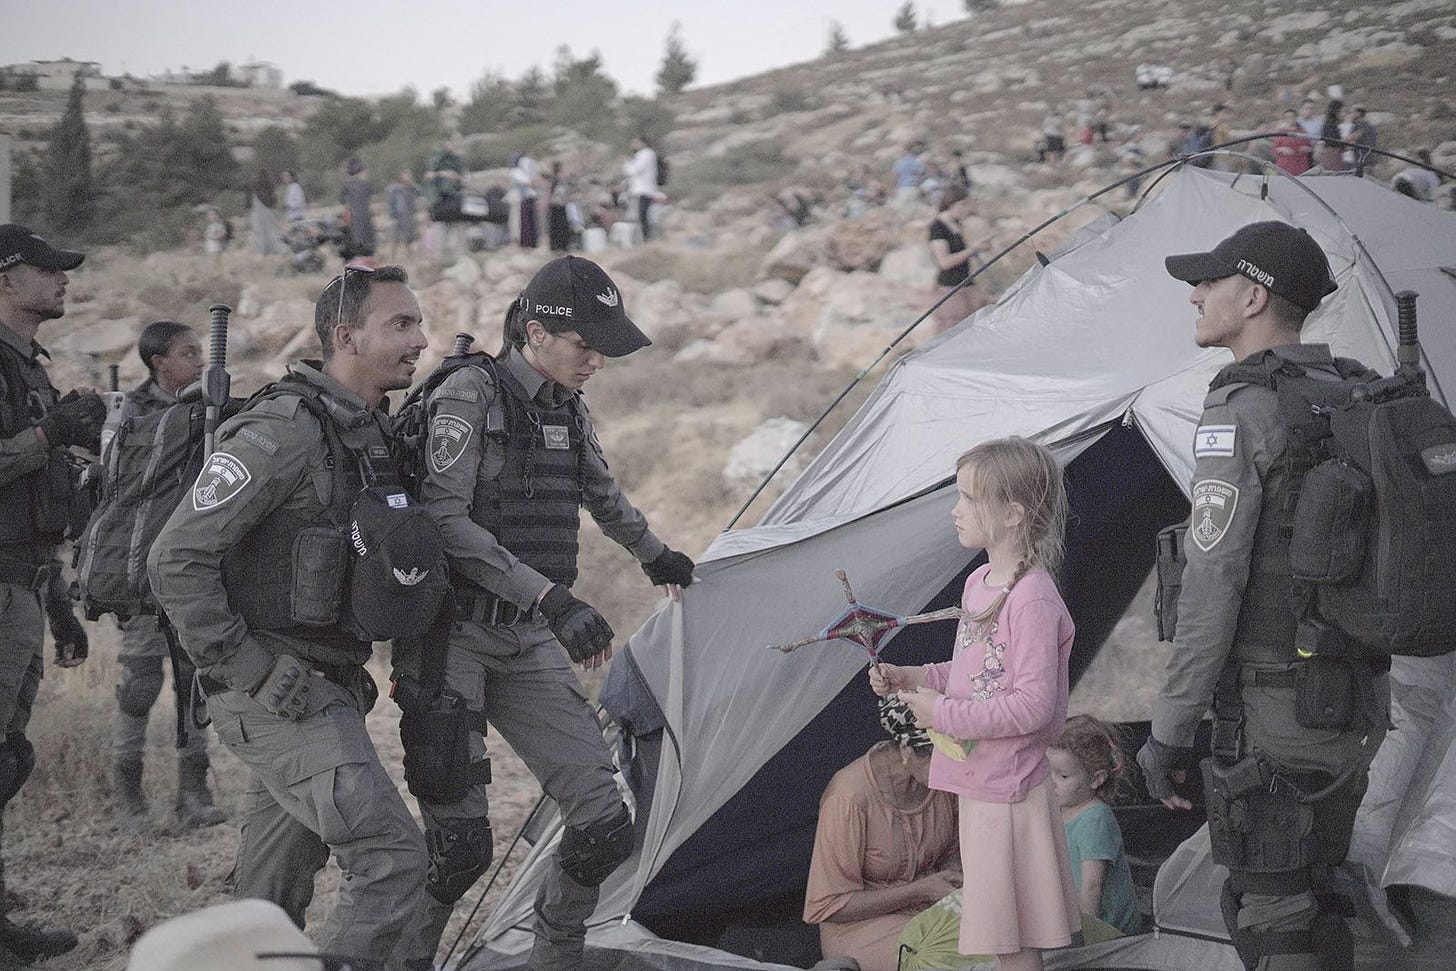 Border patrol soldiers interact with settler activists. (Photo by Natan Odenheimer)